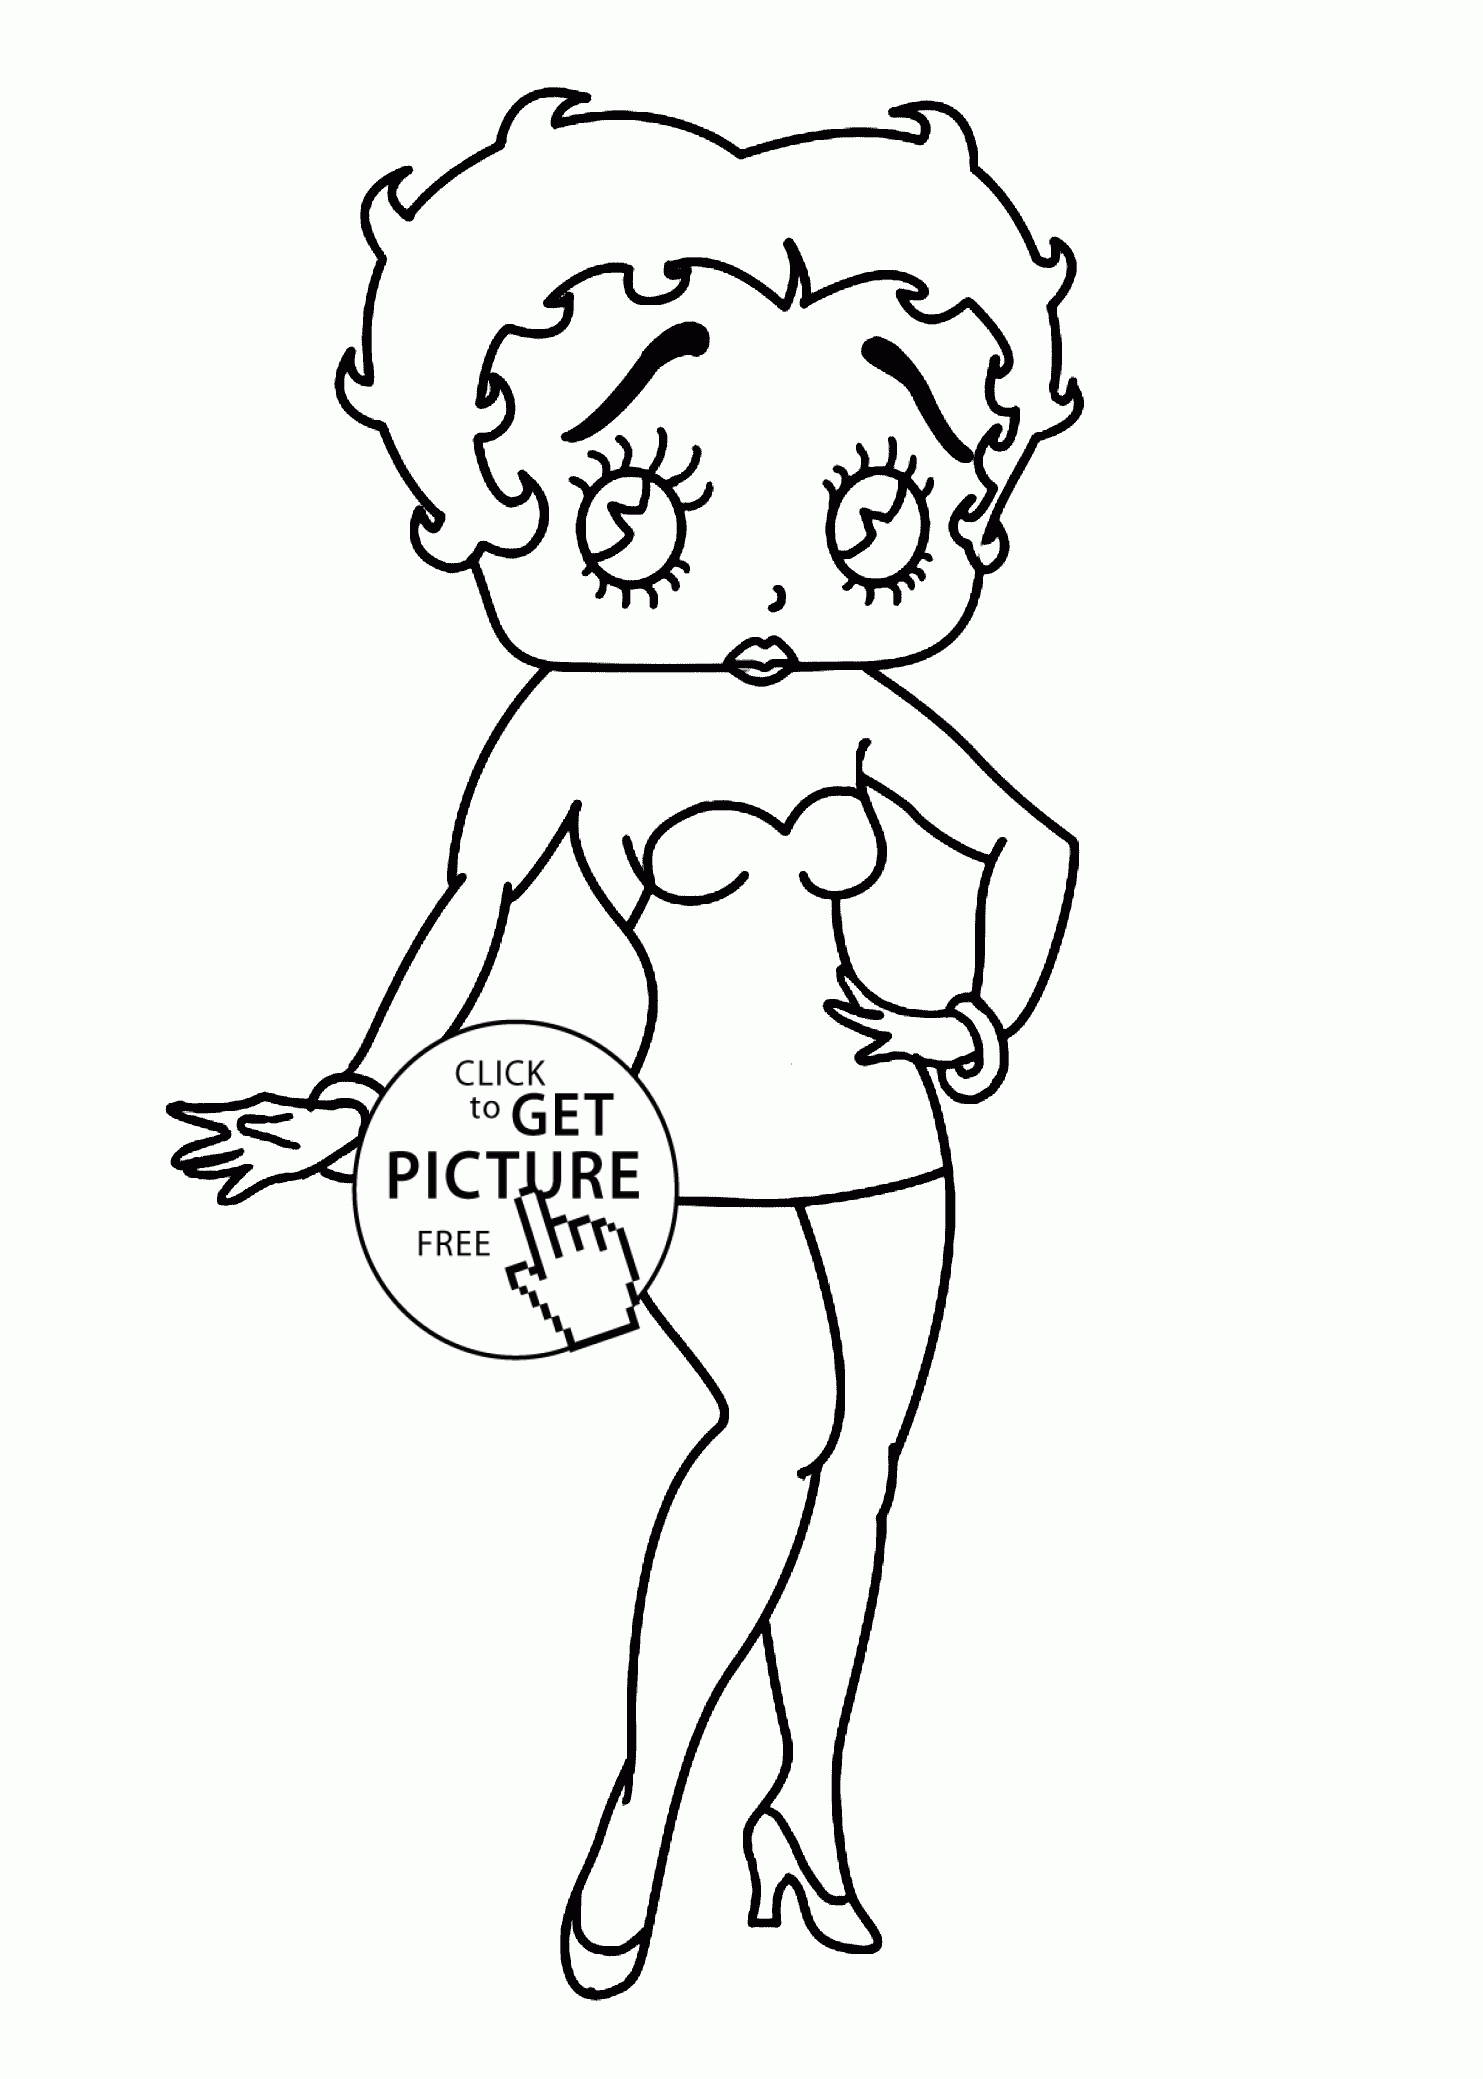 Betty Boop Coloring Pages Staying For Kids, Printable Free | Coloing - Free Printable Betty Boop